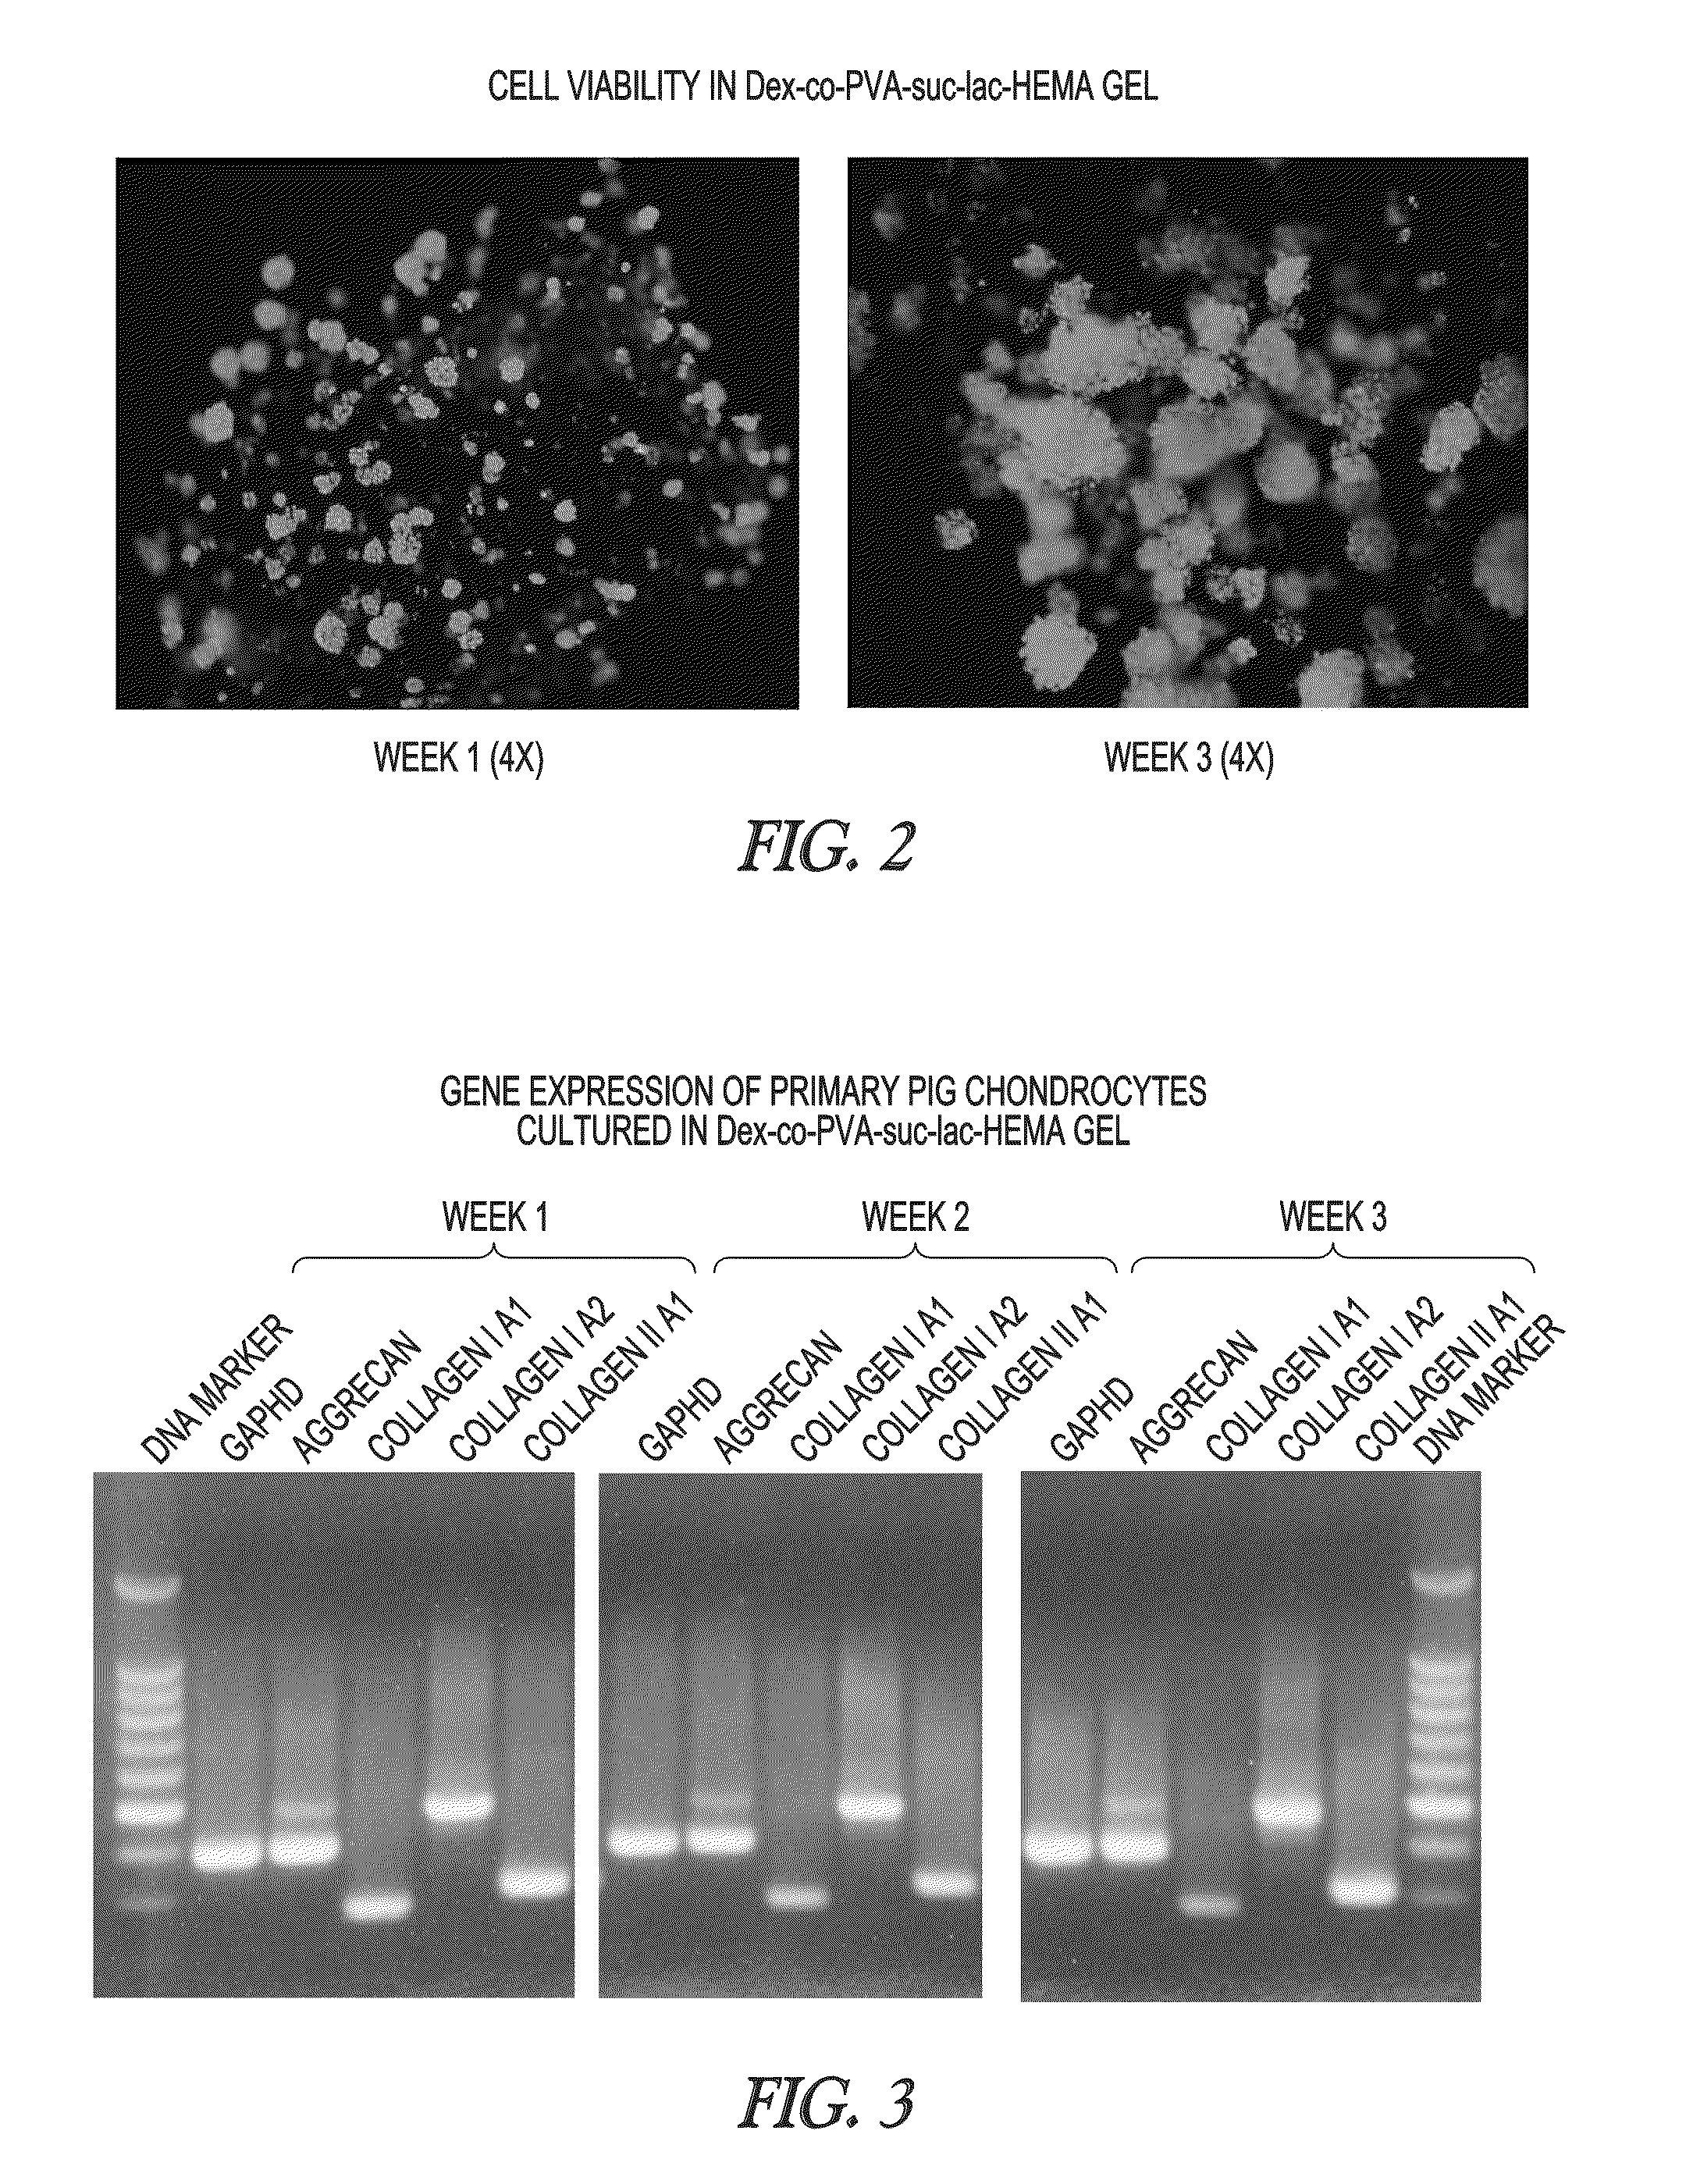 Hydrogel-forming composition comprising natural and synthetic segments